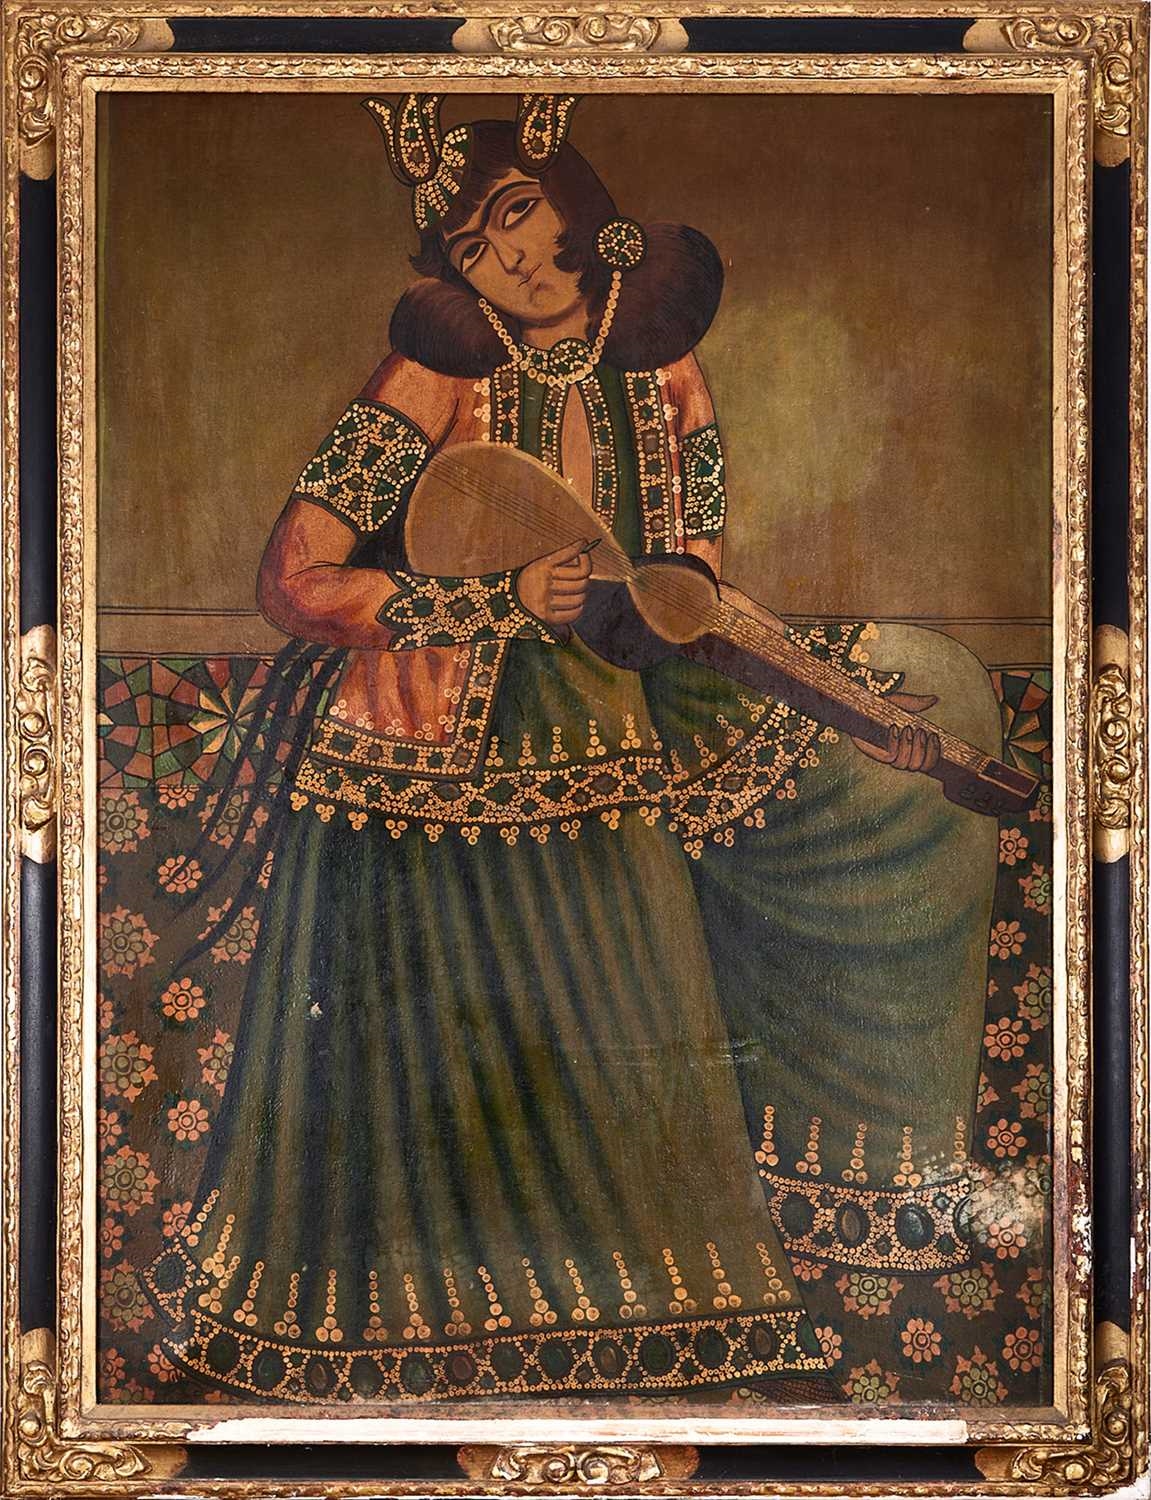 A LARGE LATE 19TH CENTURY QAJAR PAINTING OF A GIRL by Persian School, 19th Century, LATE 19TH CENTURY